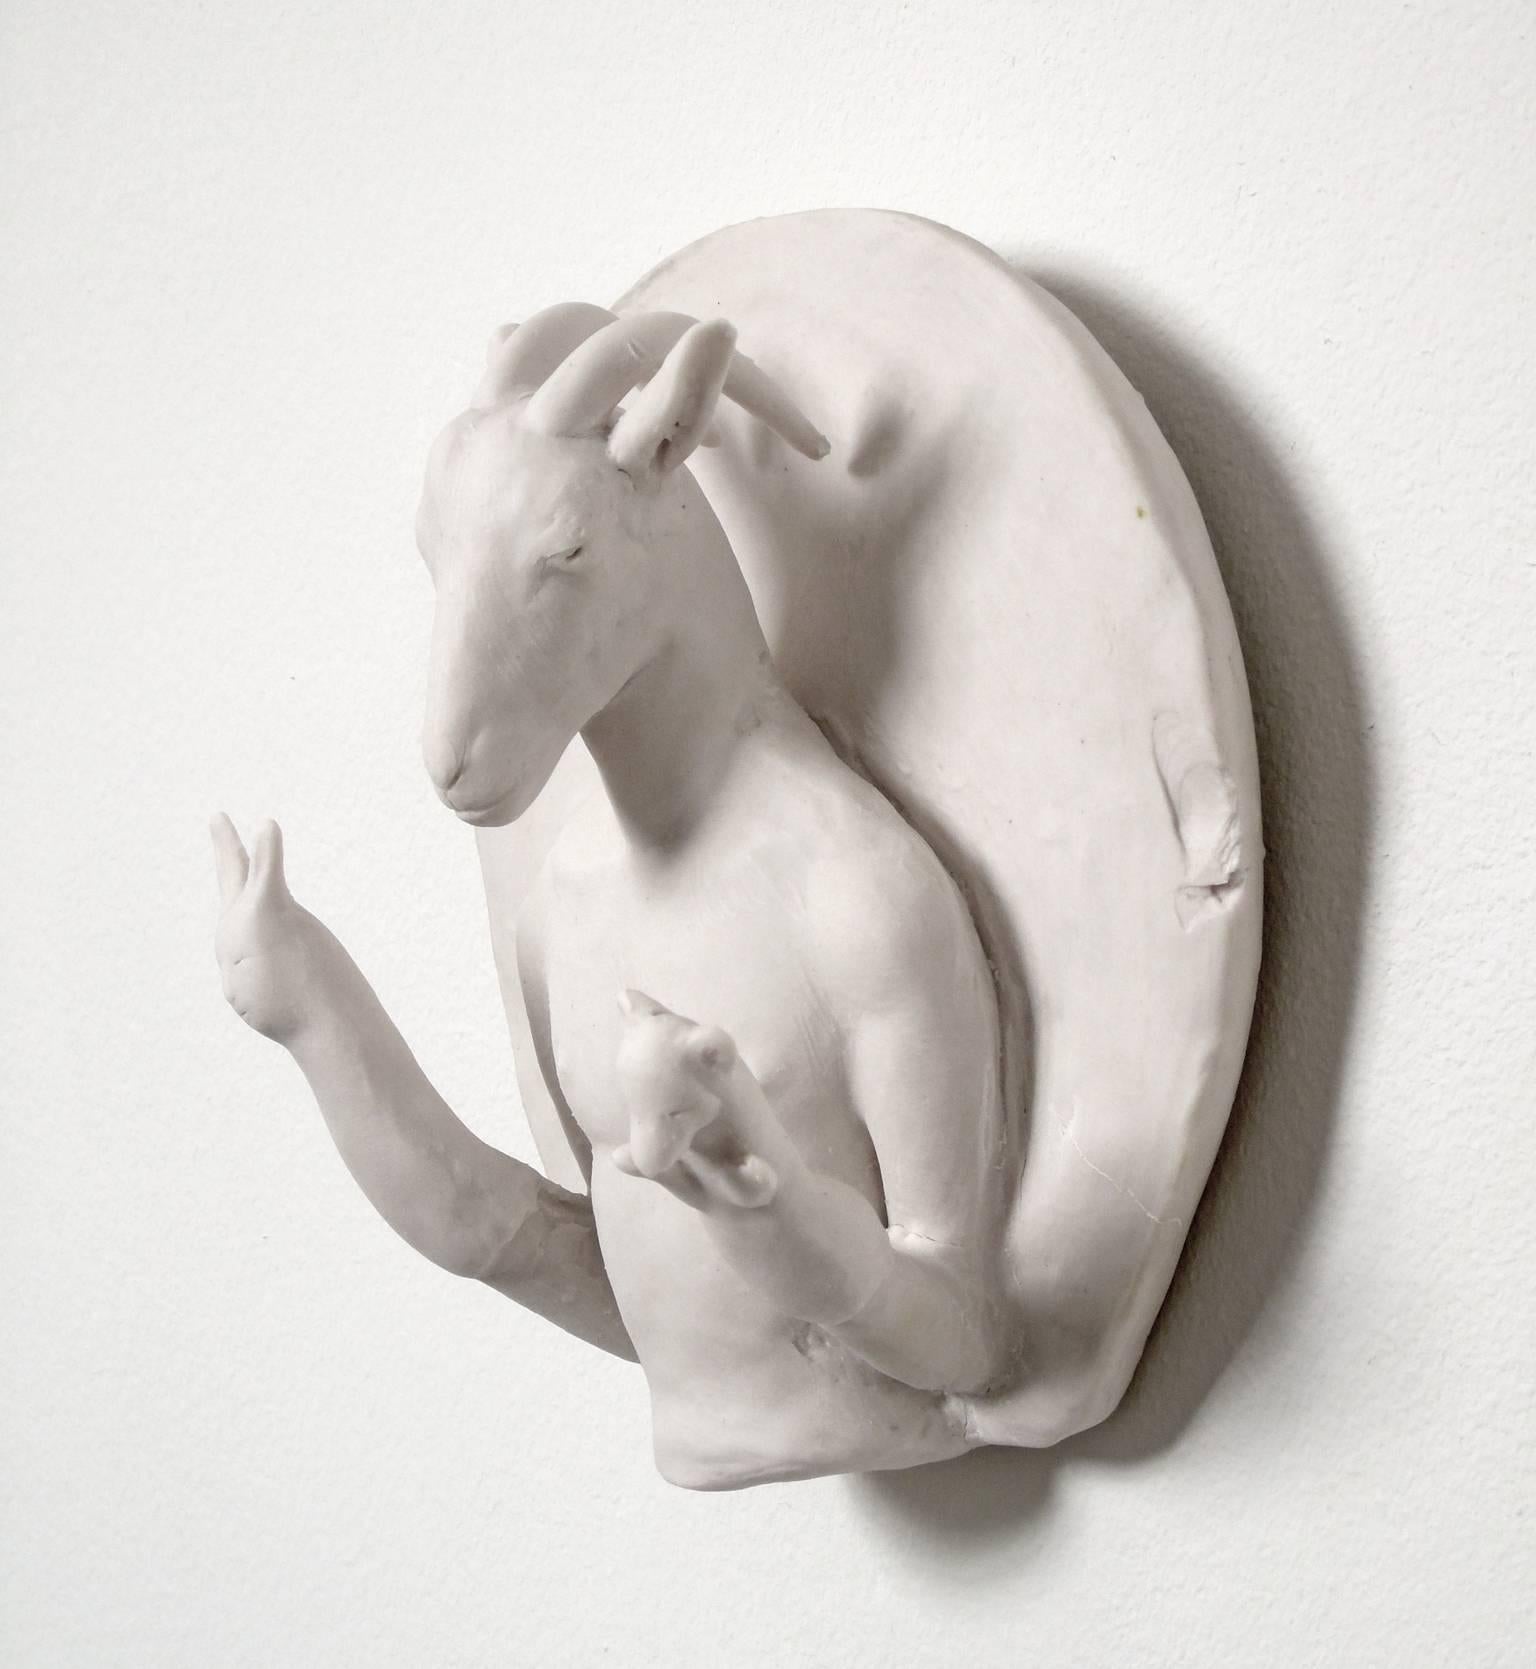 Goat God with Hand Puppets - Contemporary Sculpture by Robin Whiteman